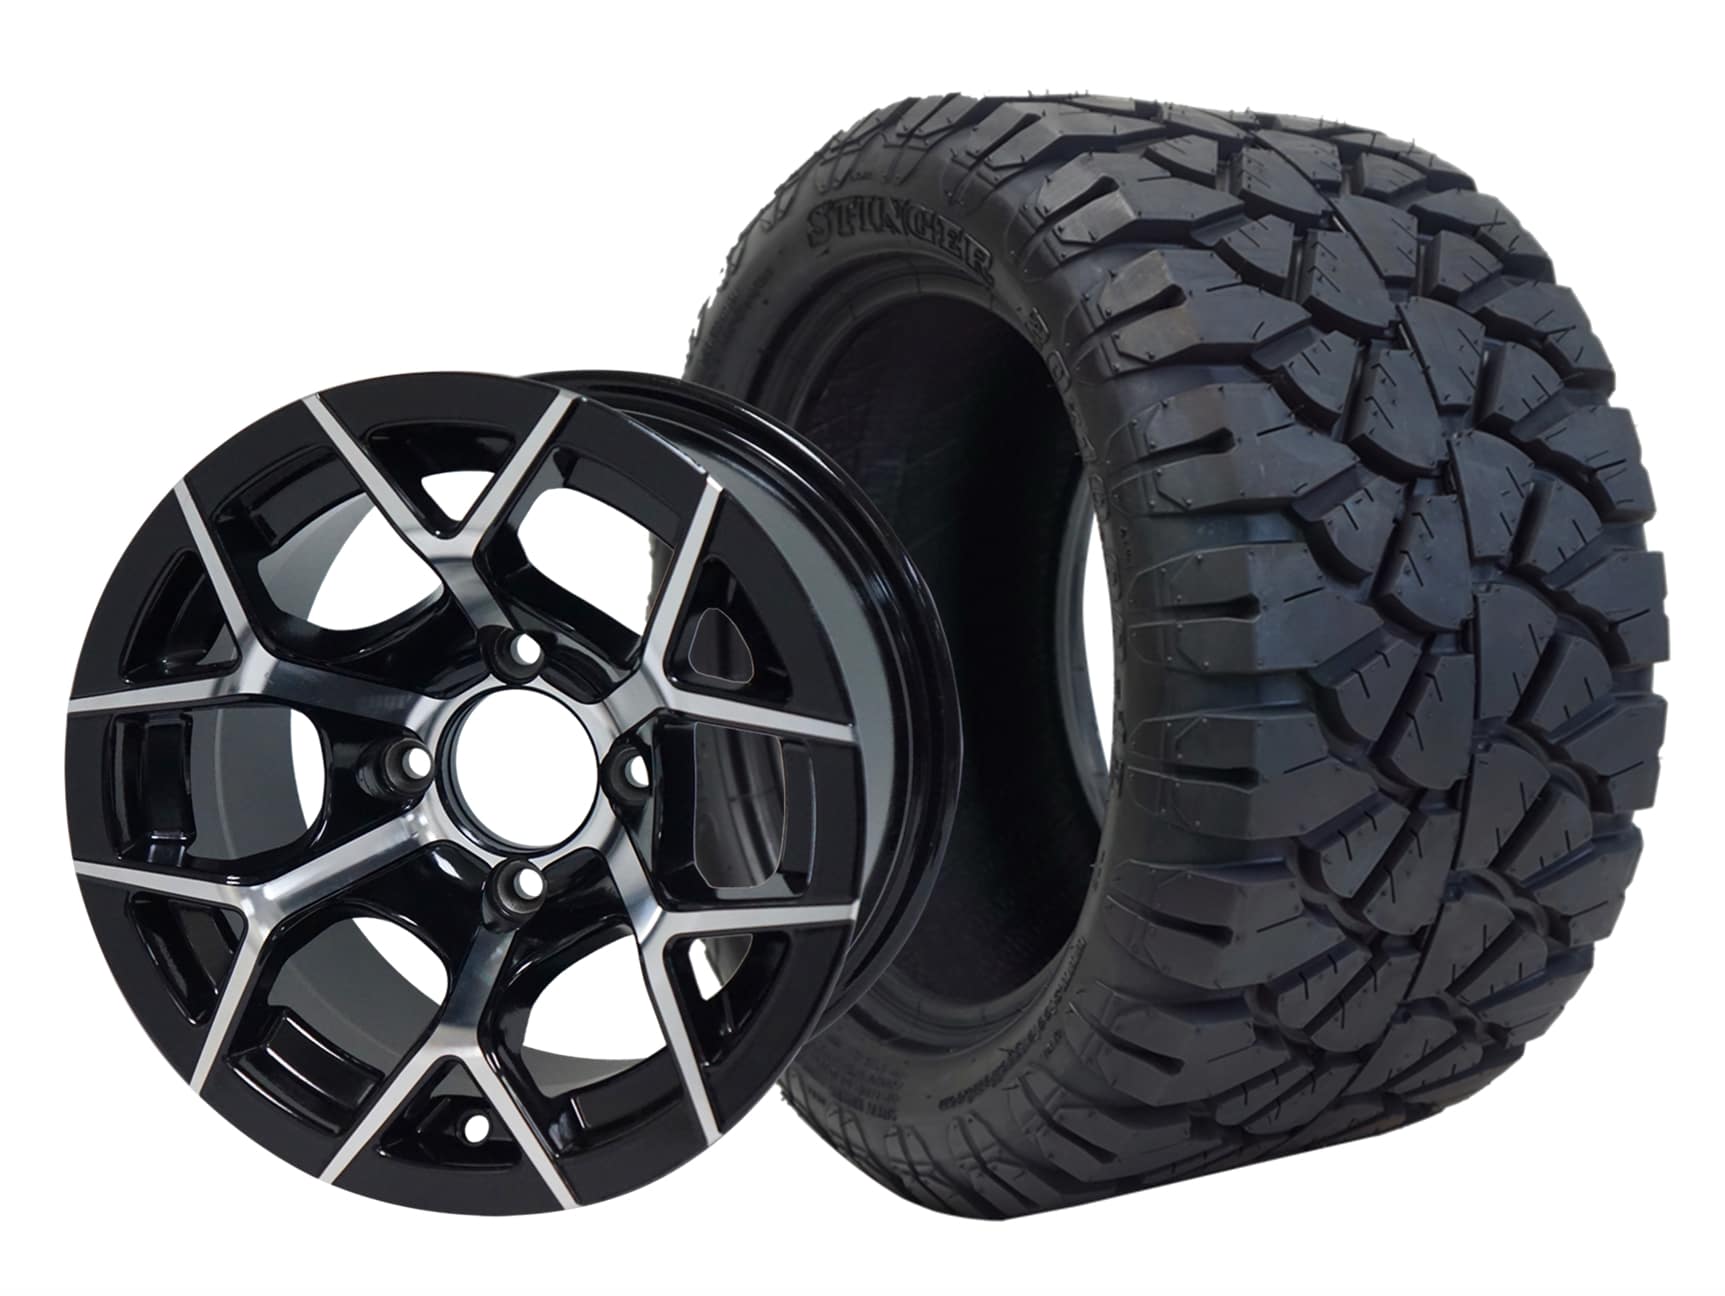 BNDL-TR1203-WH1226-CC0001-LN0004 12″ RALLY MACHINED/BLACK WHEEL – ALUMINUM ALLOY / STEELENG 22″X10.5″-12″ STINGER ALL TERRAIN TIRE DOT APPROVED